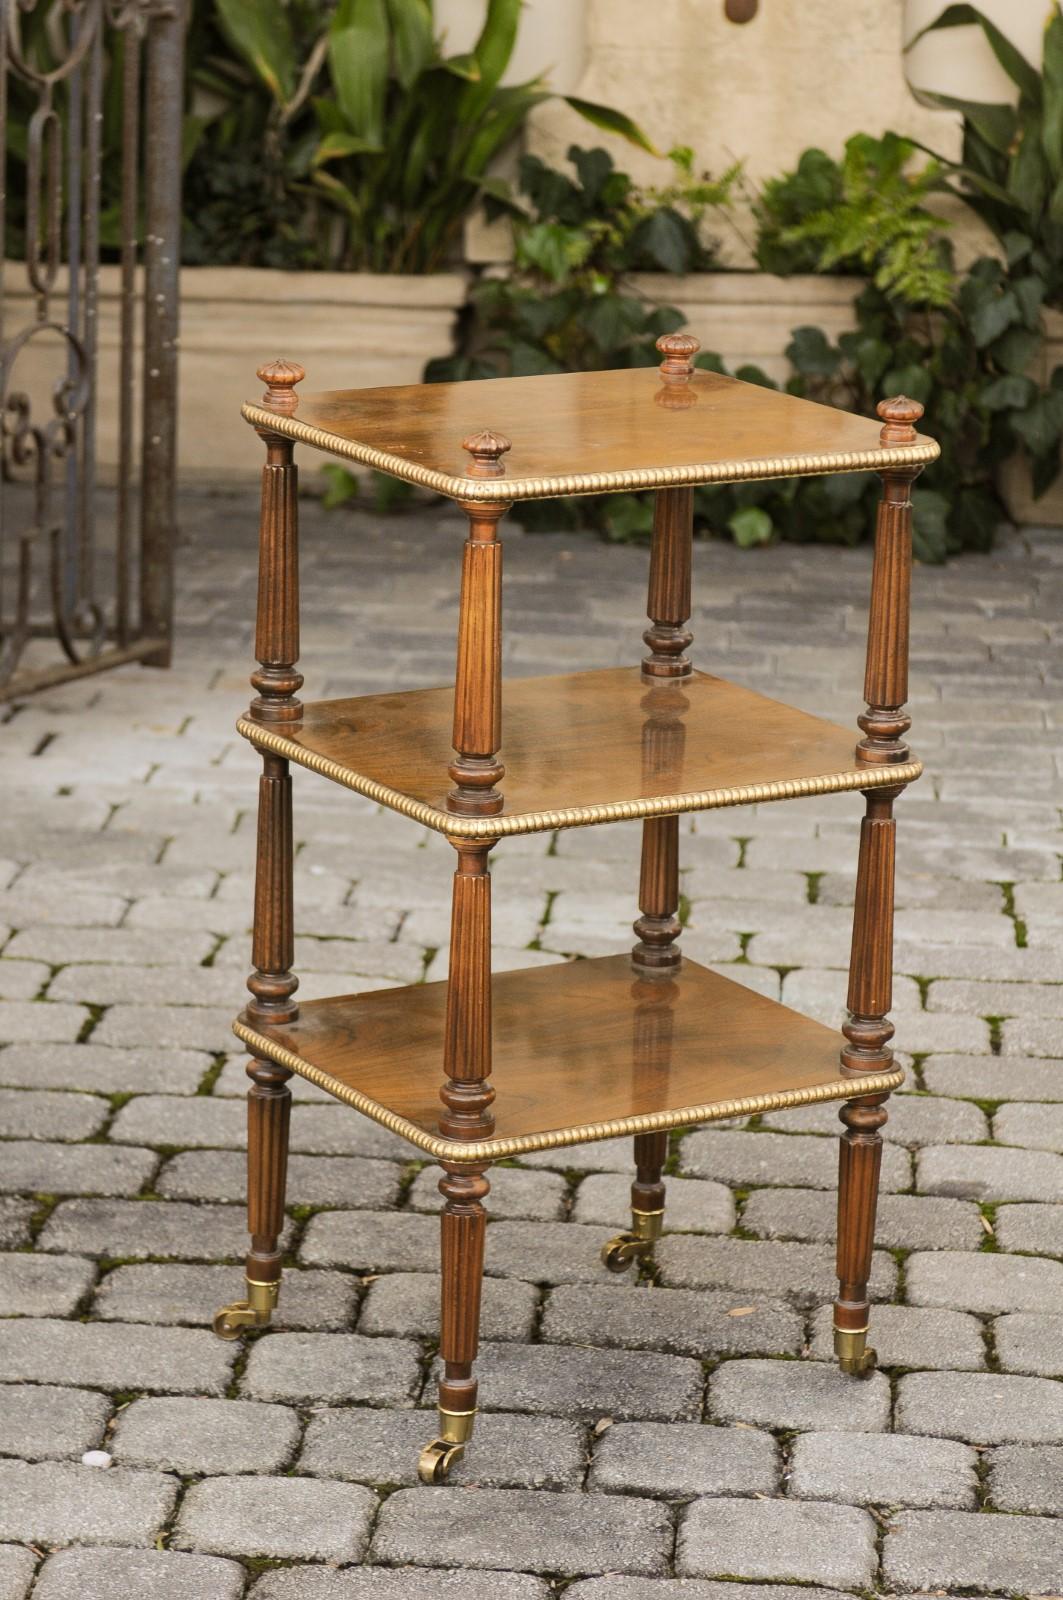 A Vintage mahogany étagère on brass casters by Baker Furniture from the mid-20th century with three shelves, gilded gadrooned motifs and reeded legs. Born during the midcentury period, this elegant étagère features three rectangular shelves, each